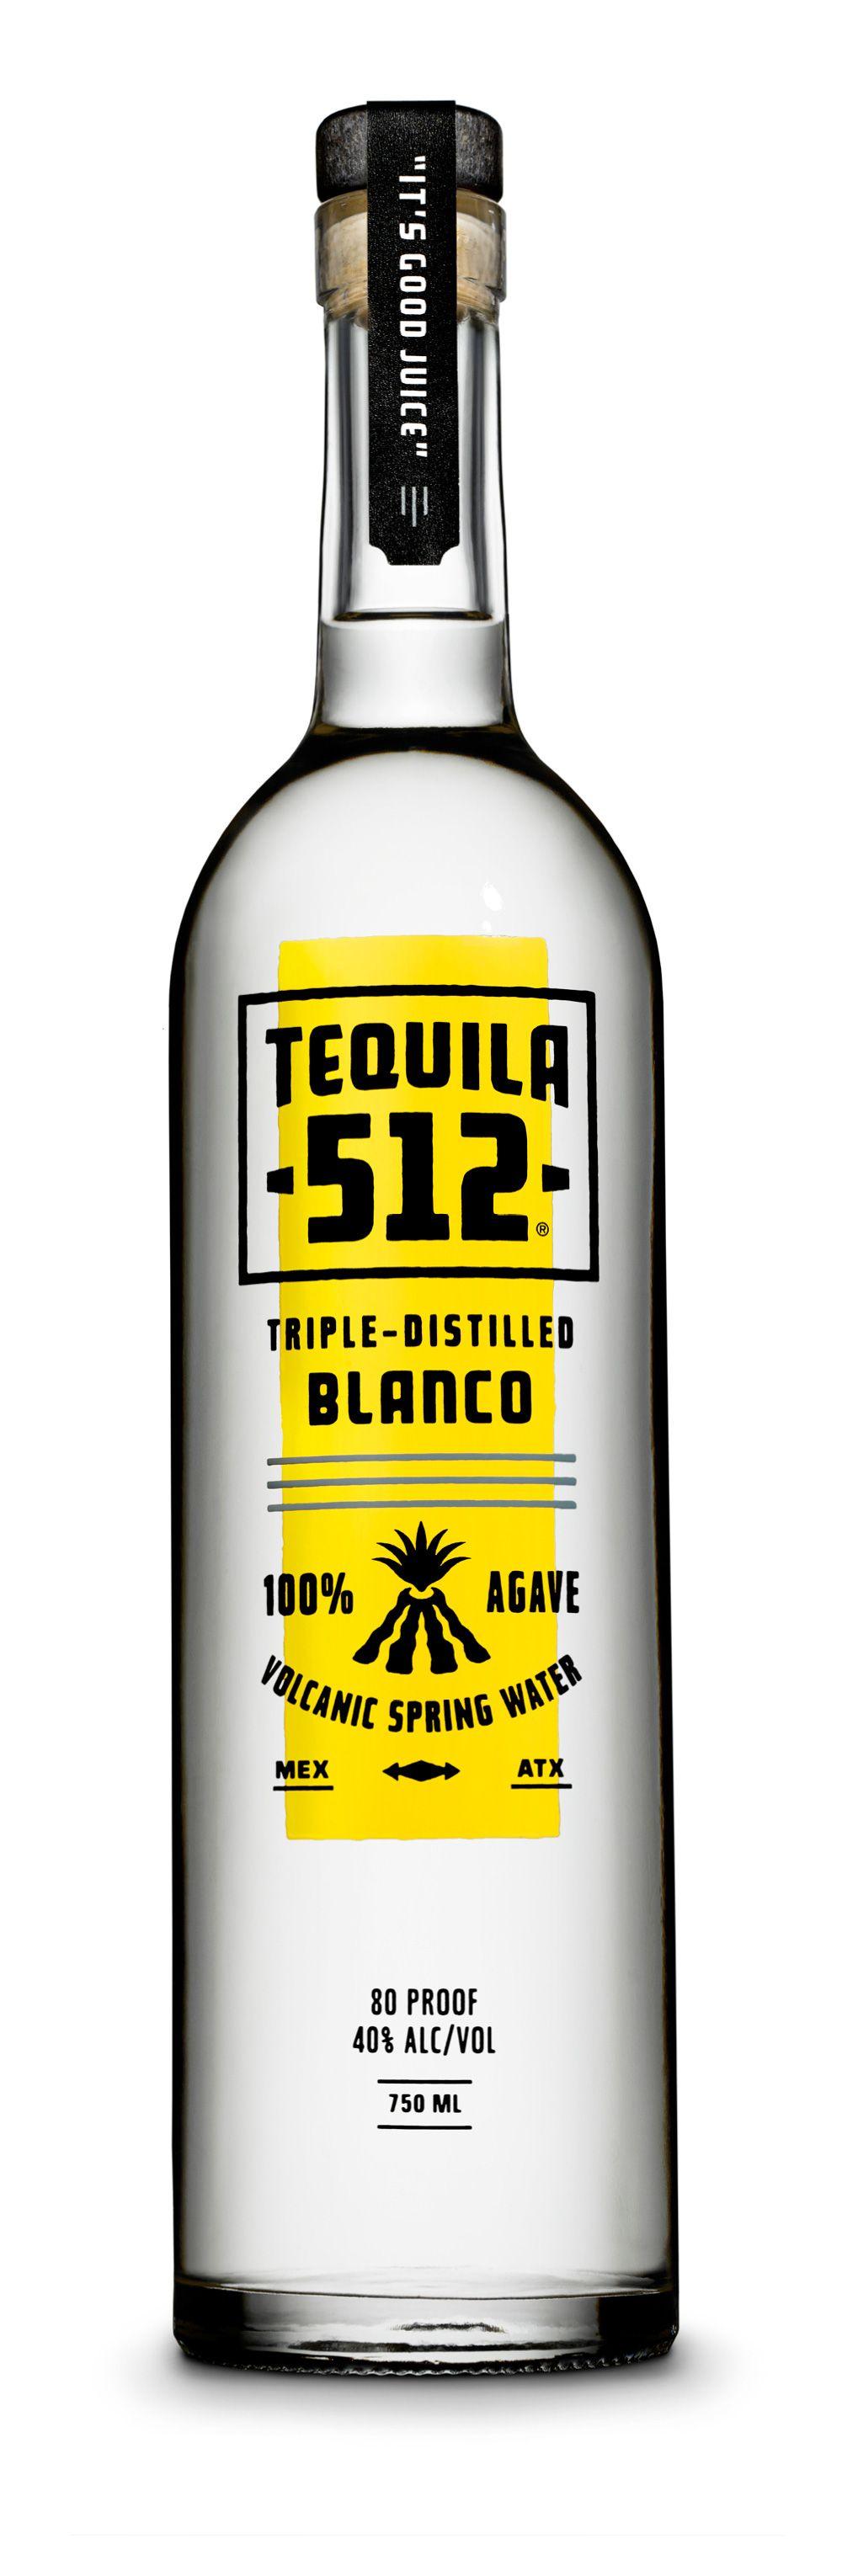 Tequila Logo - Brand New: New Logo and Packaging for Tequila 512 by The Butler Bros